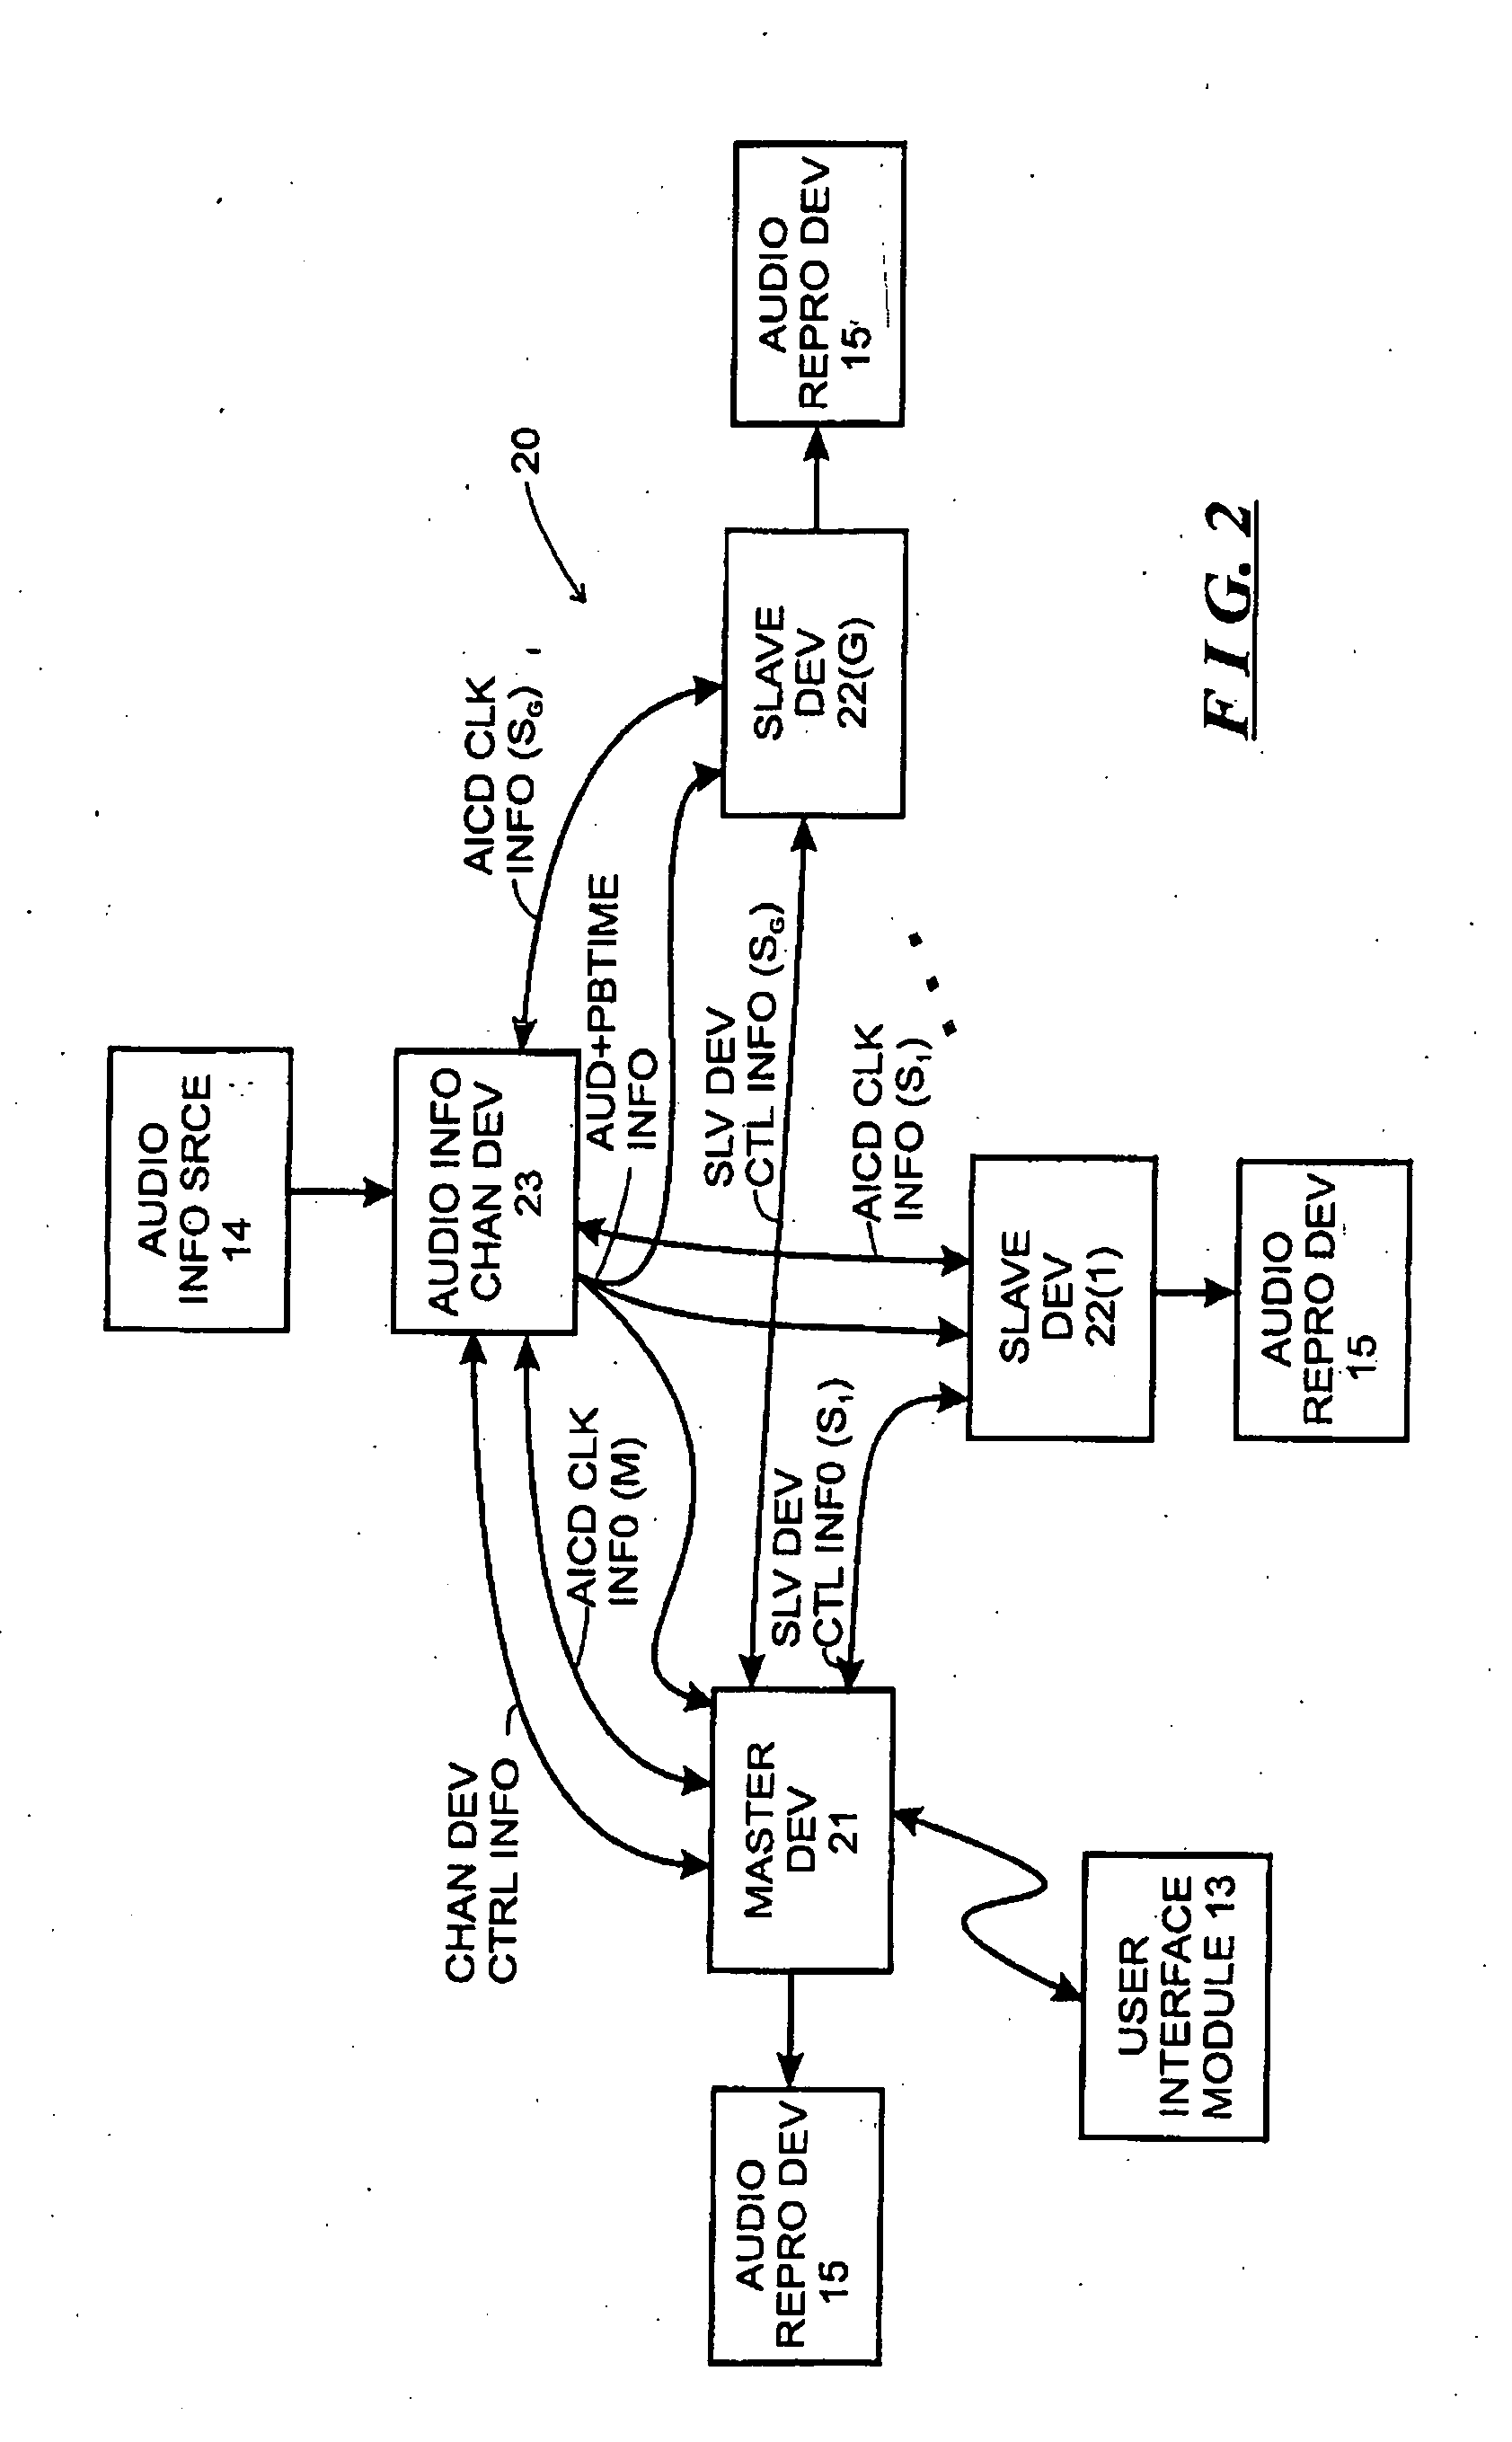 Systems and methods for synchronizing operations among a plurality of independently clocked digital data processing devices without a voltage controlled crystal oscillator